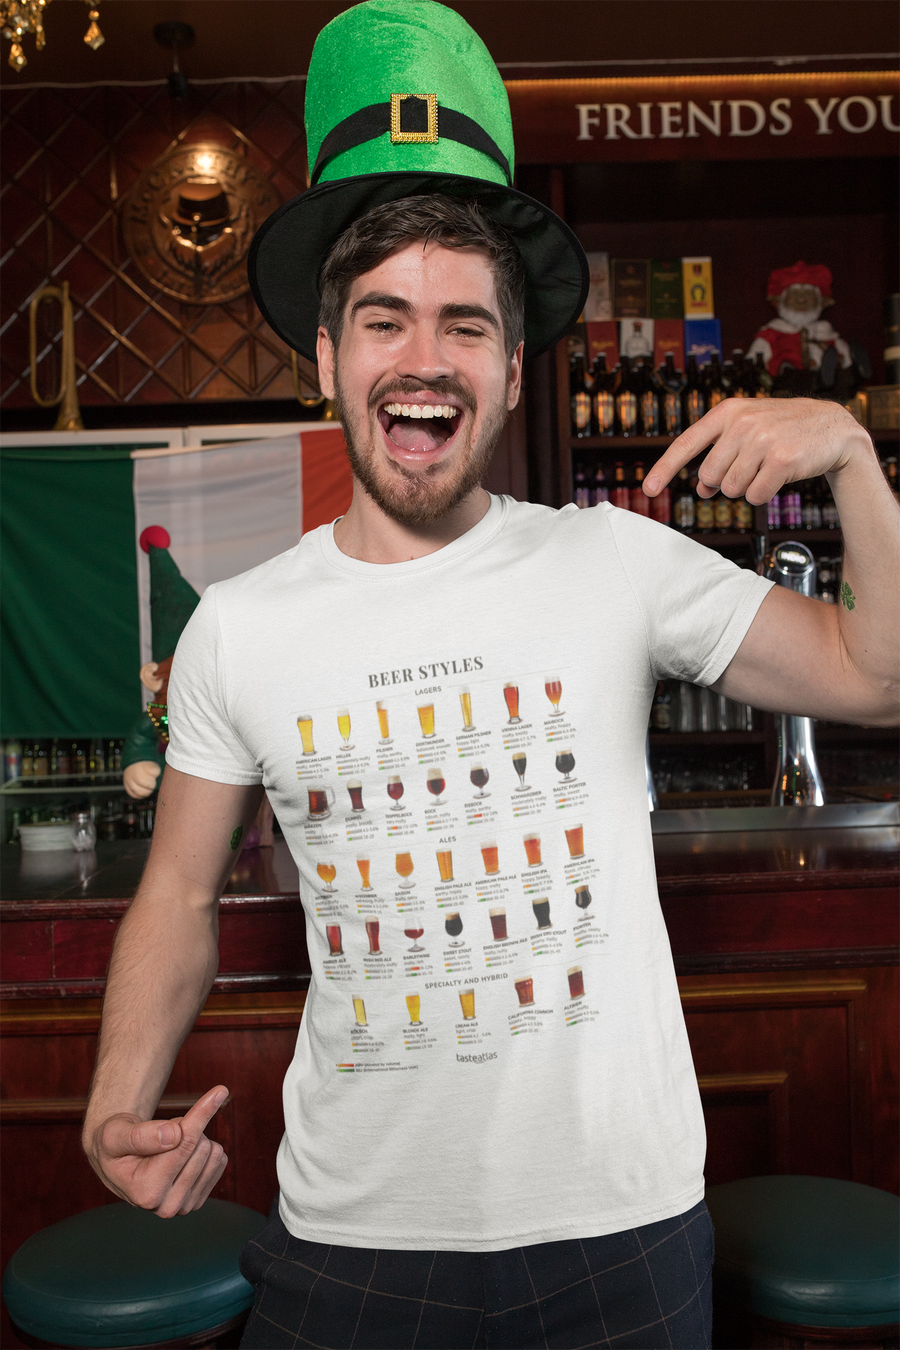 different beer styles t-shirt worn by a man in a pub